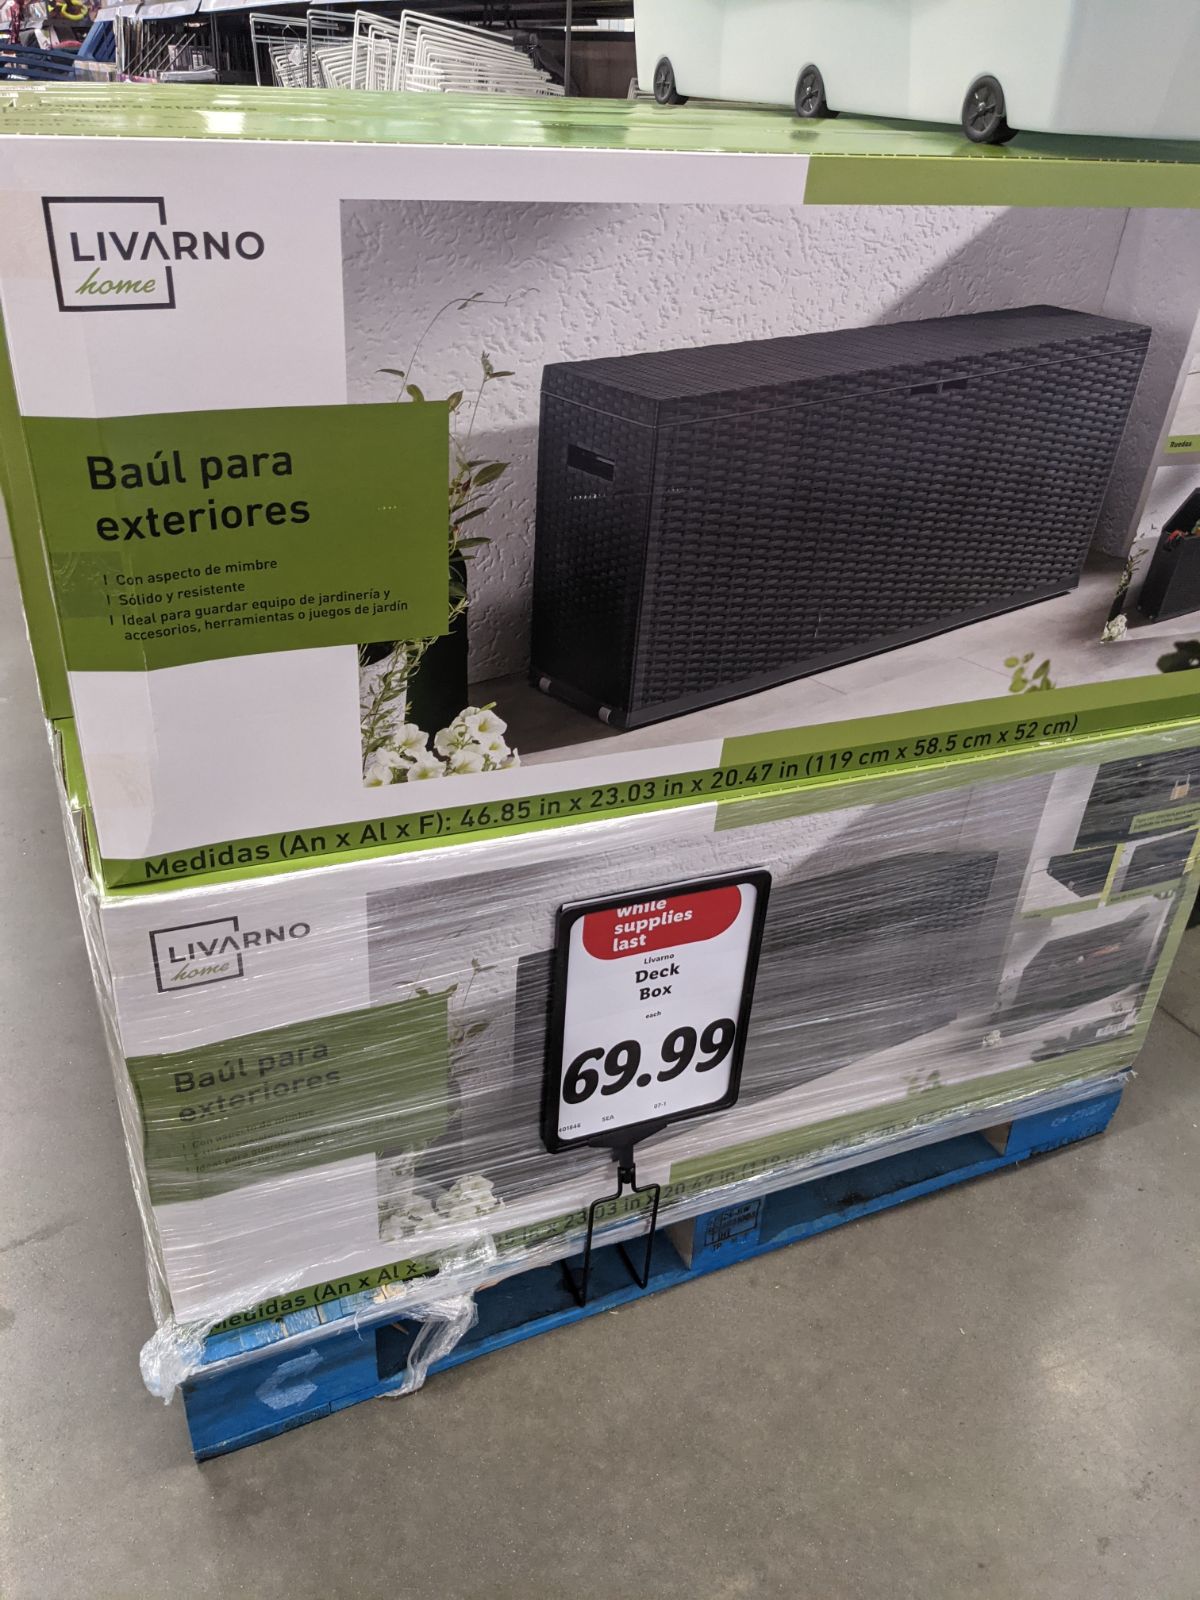 Outdoor toy box / deck box for sale at Lidl Royersford (February 2023)